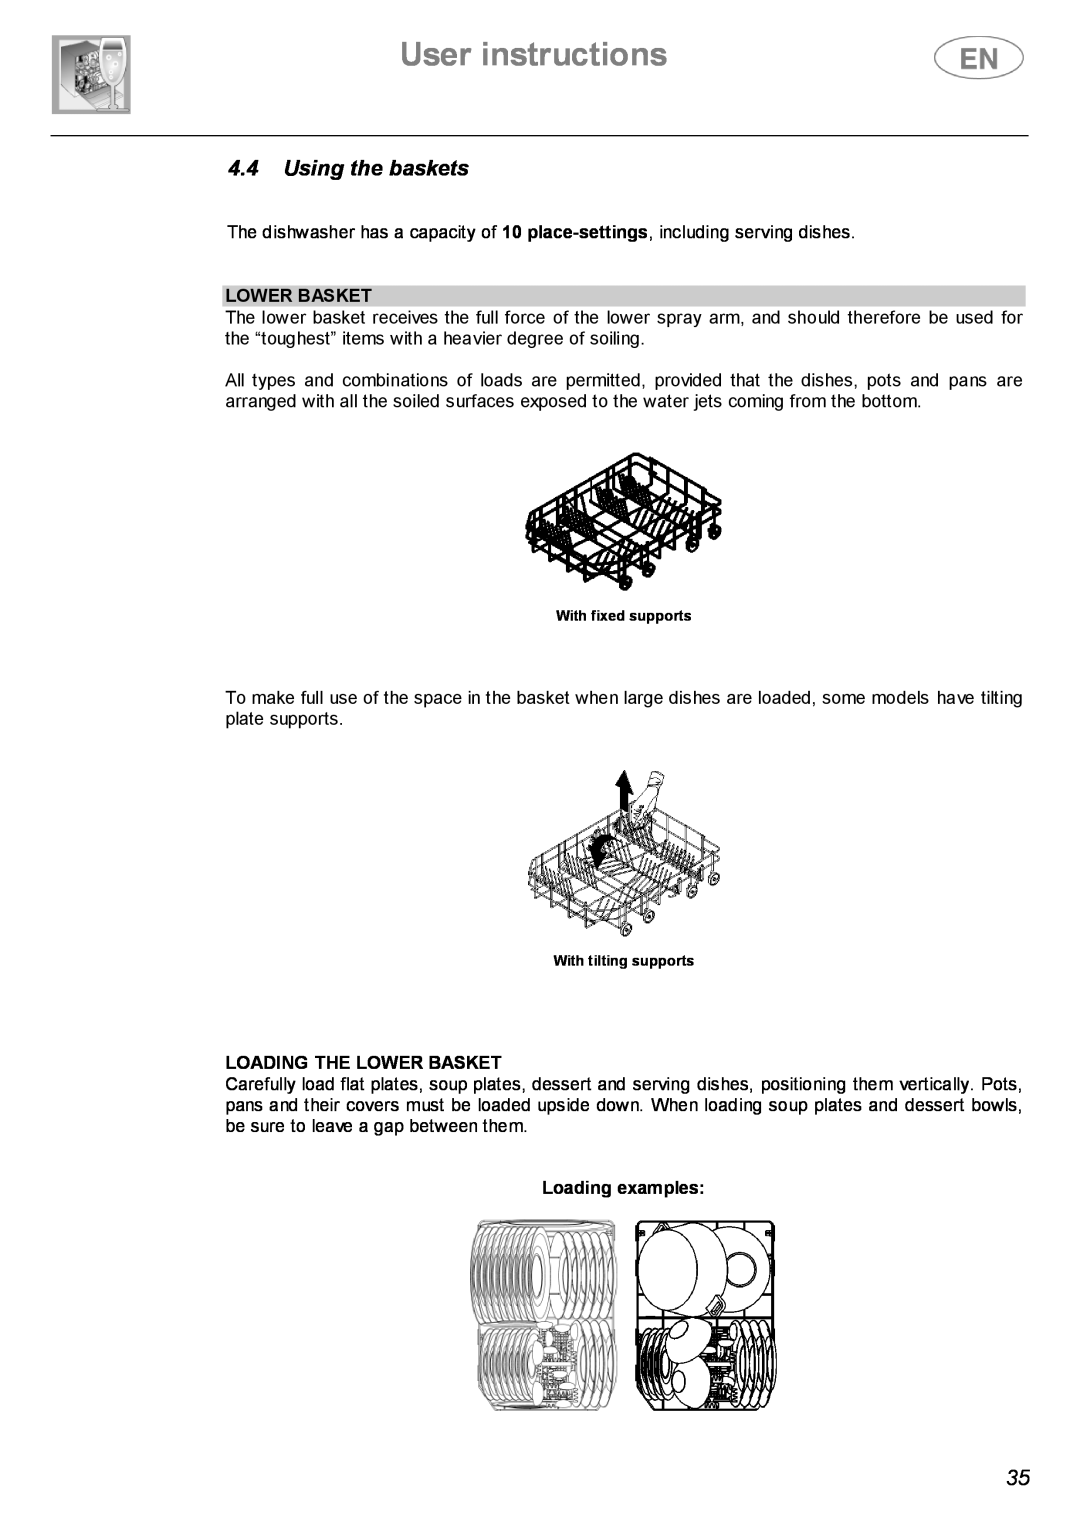 Smeg STX4-3 instruction manual User instructions, 4.4Using the baskets, Loading The Lower Basket, Loading examples 